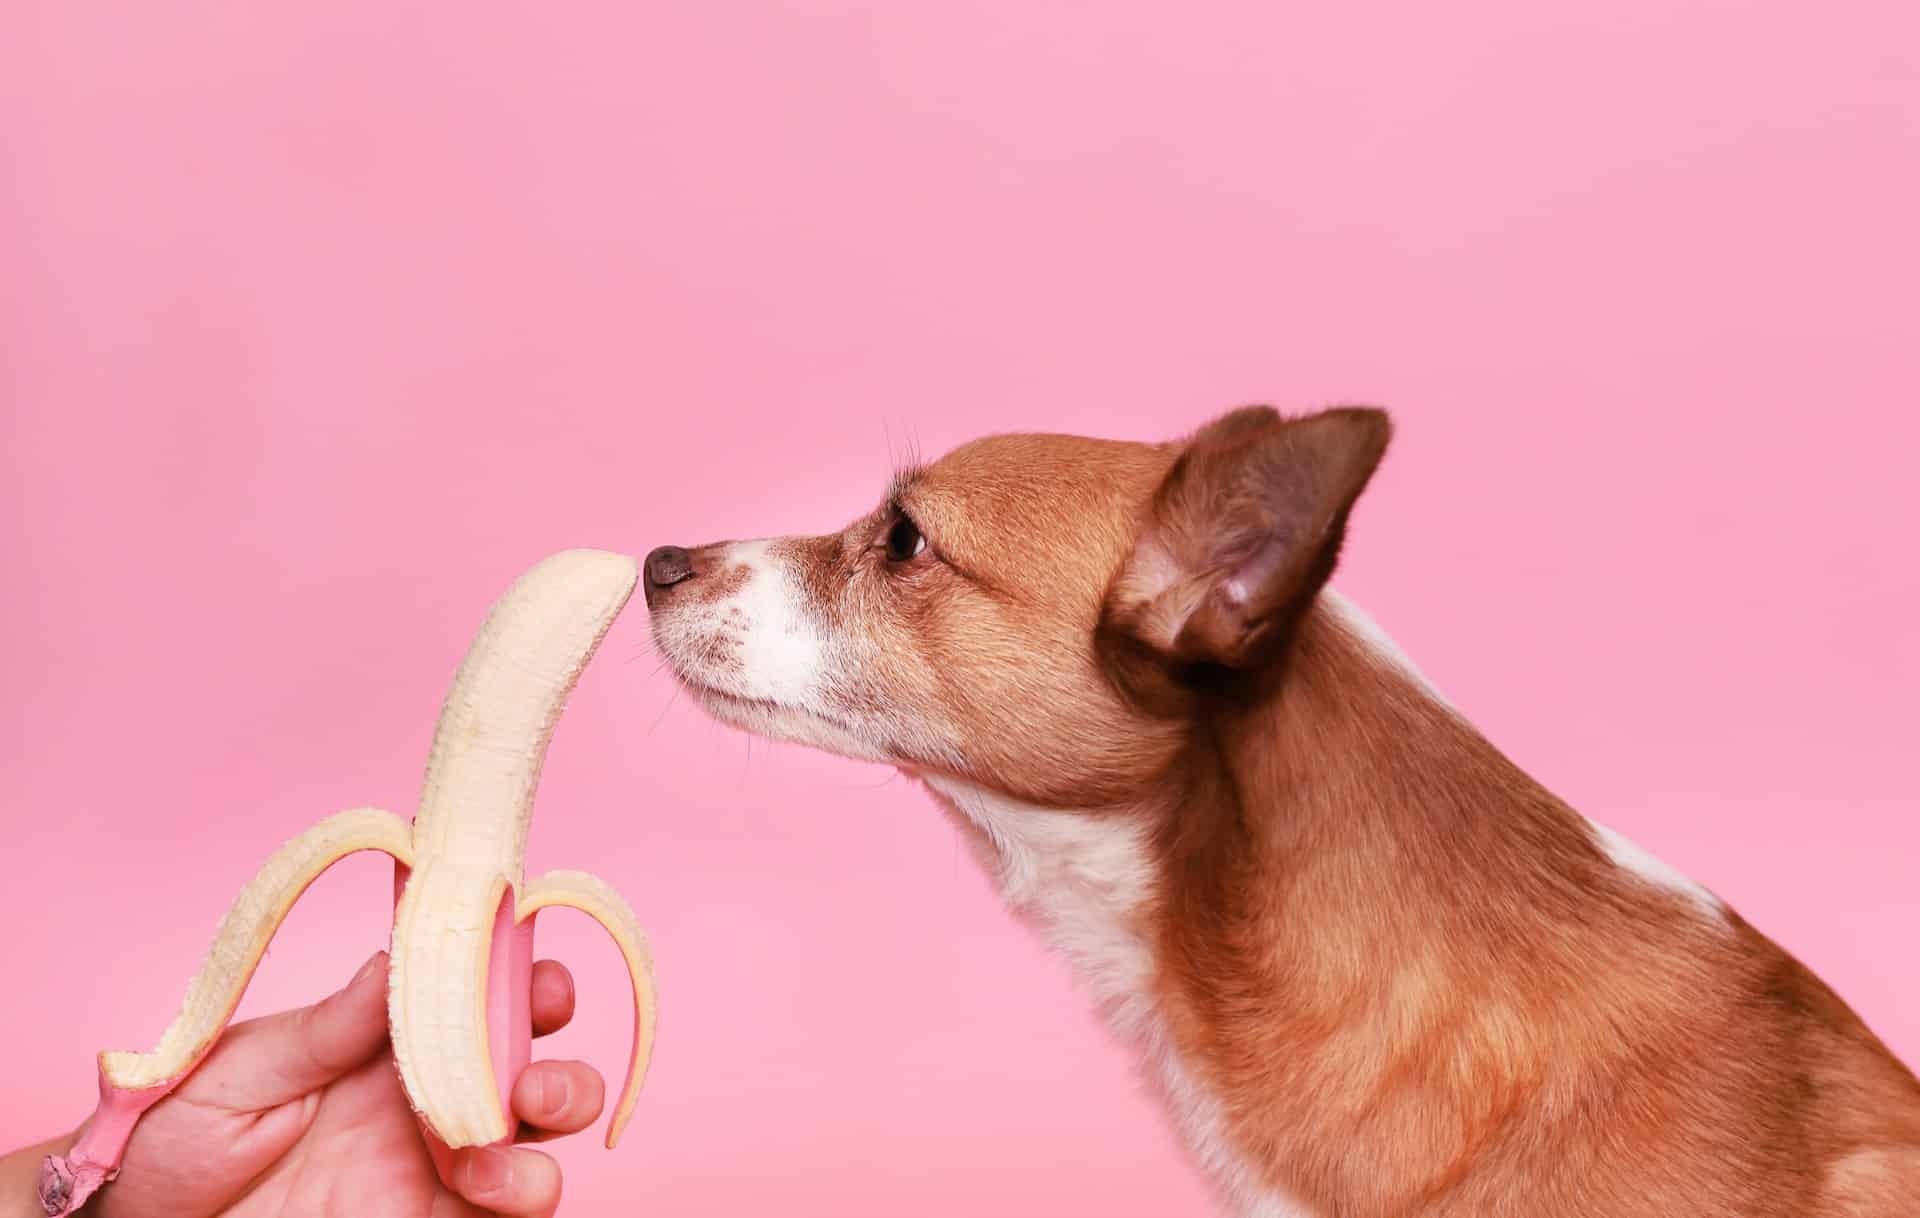 Dog smelling on a pink banana. Studio with pink background.